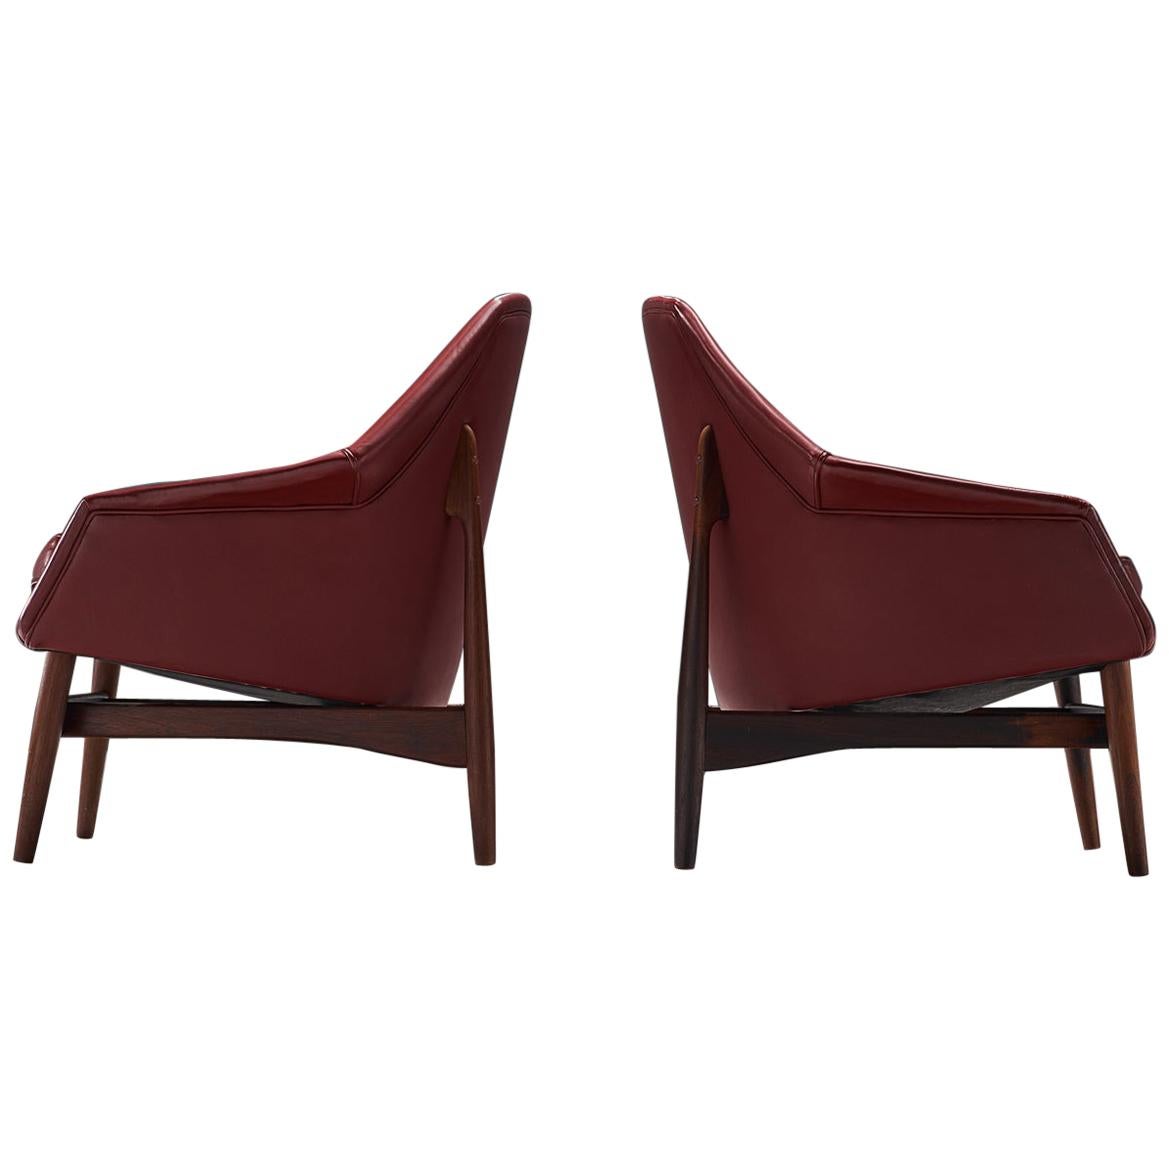 Ib Kofod-Larsen Lounge Chairs in Rosewood and Burgundy Leather